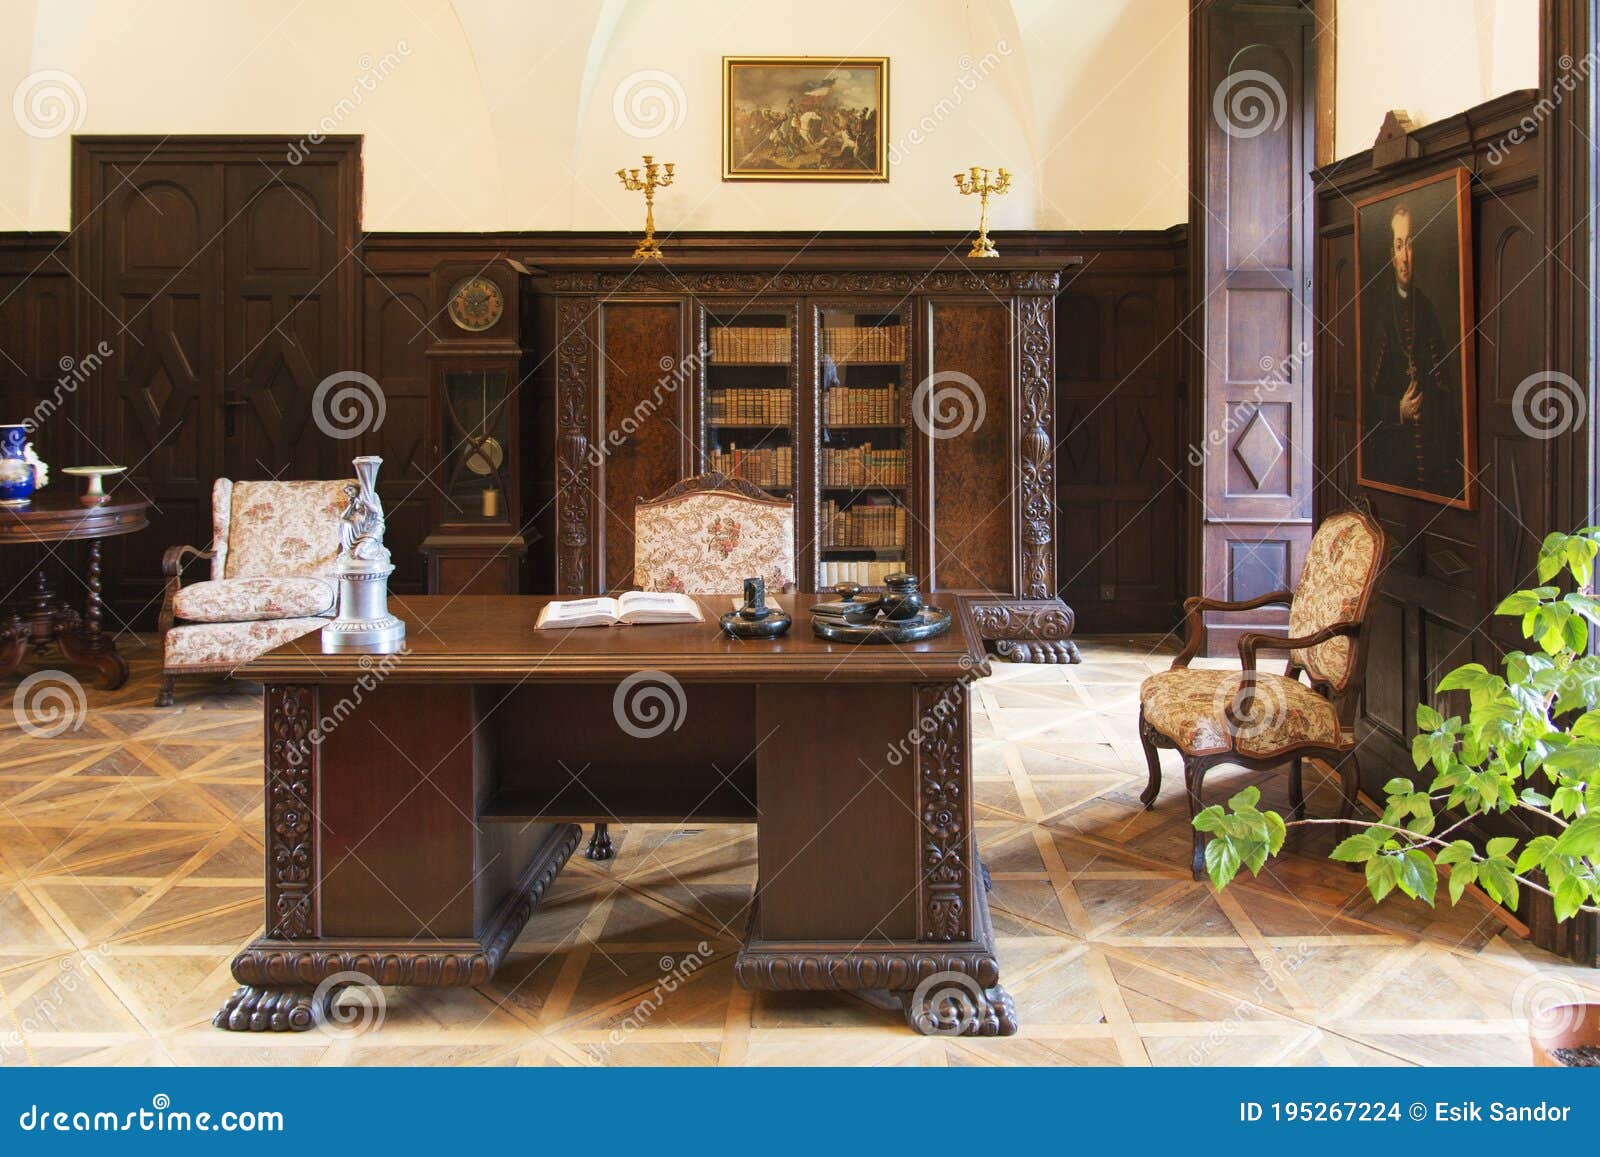 Antique Office with Carved Wood Furniture from the 18th Century. Editorial  Stock Image - Image of building, ornate: 195267224